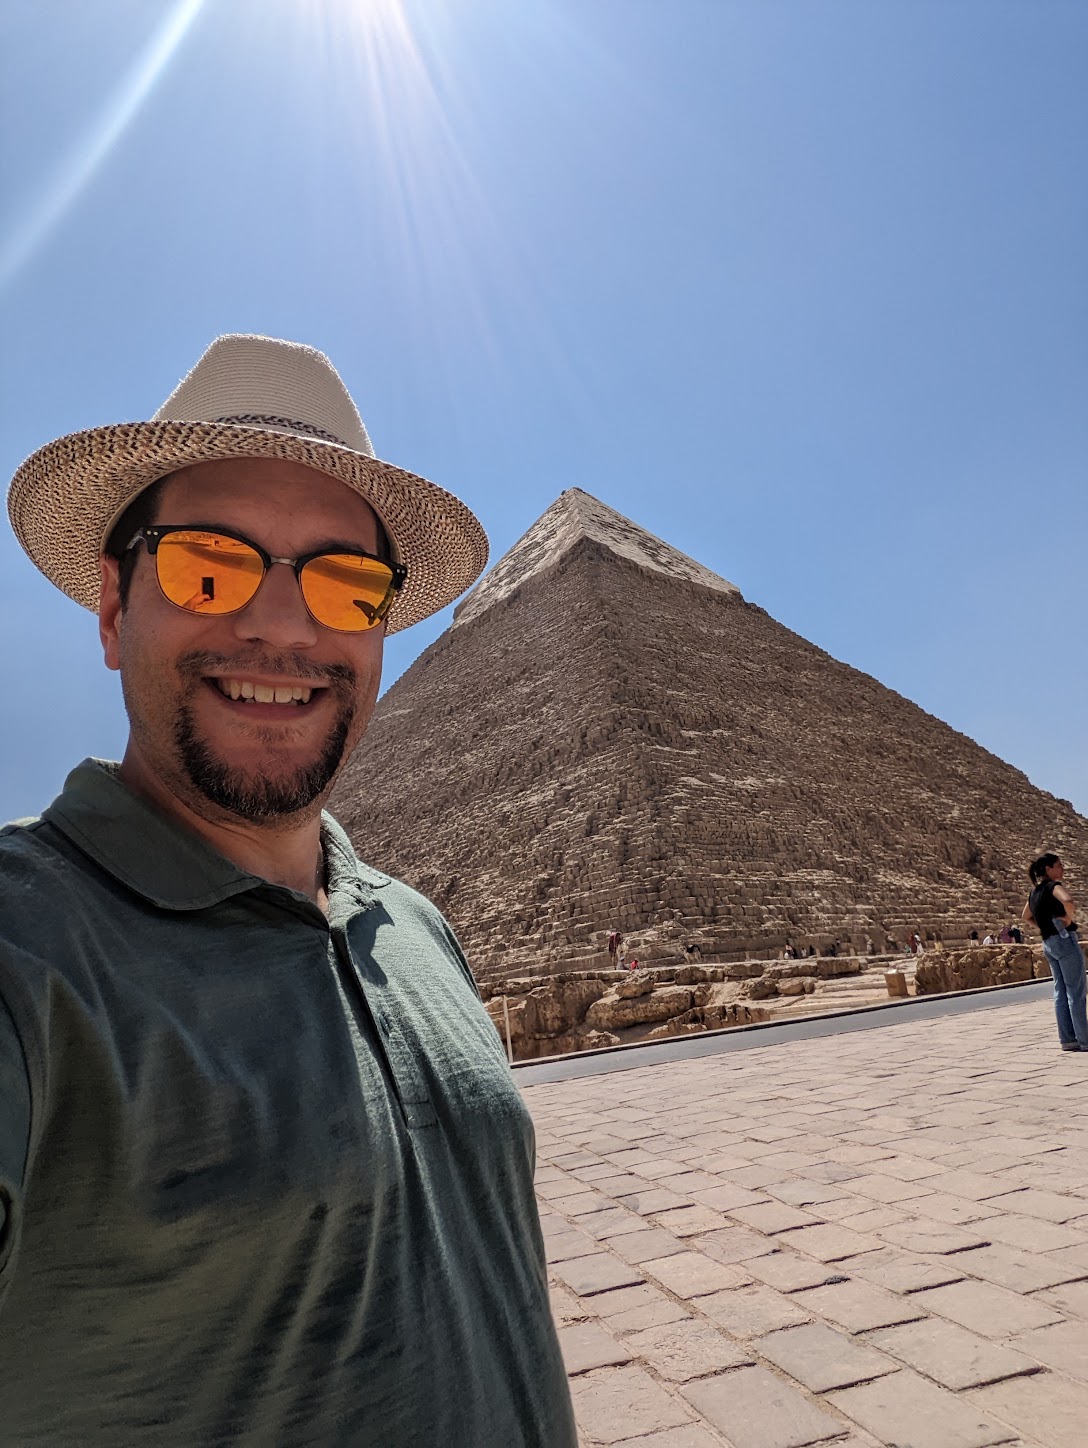 a man taking a selfie in front of a pyramid